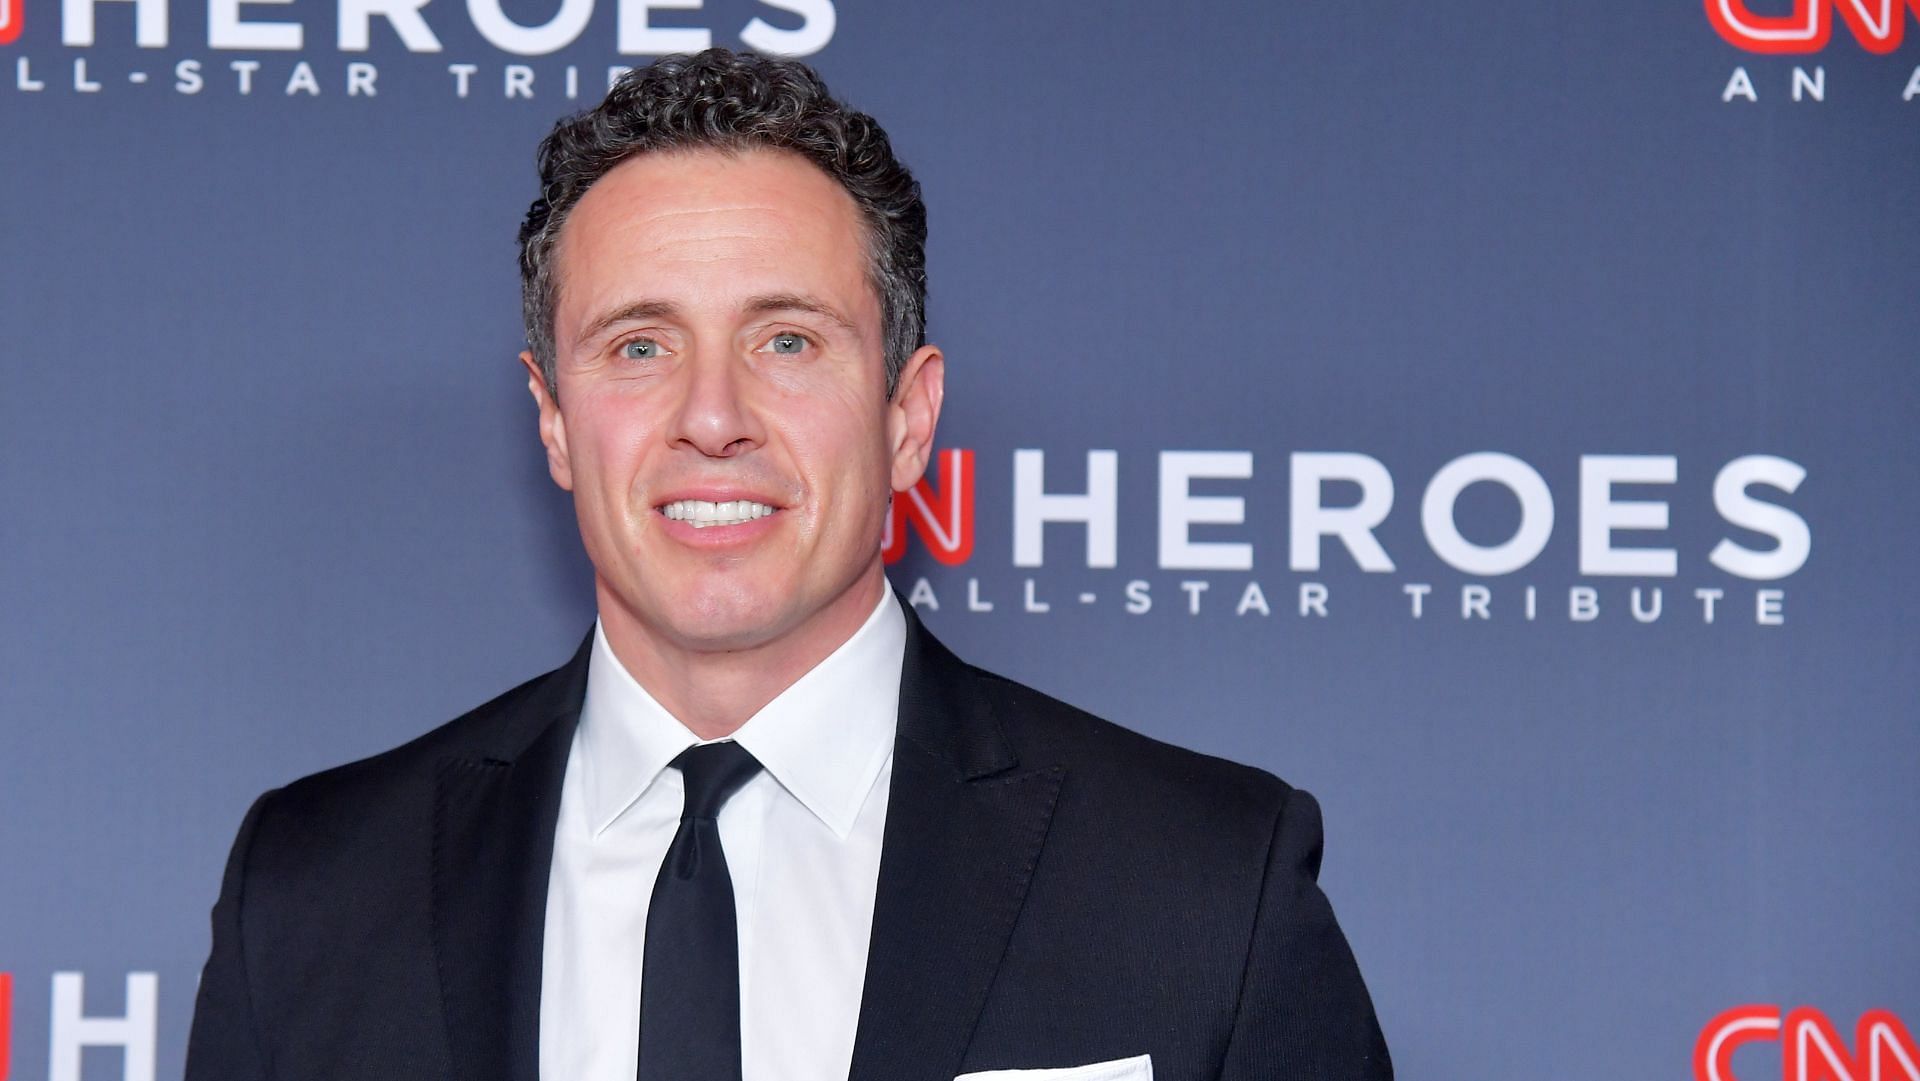 Chris Cuomo was fired from CNN in December 2021 after it was reported that he was serving as an informal advisor to his brother, Andrew Cuomo. (Image via Michael Loccisano/Getty)